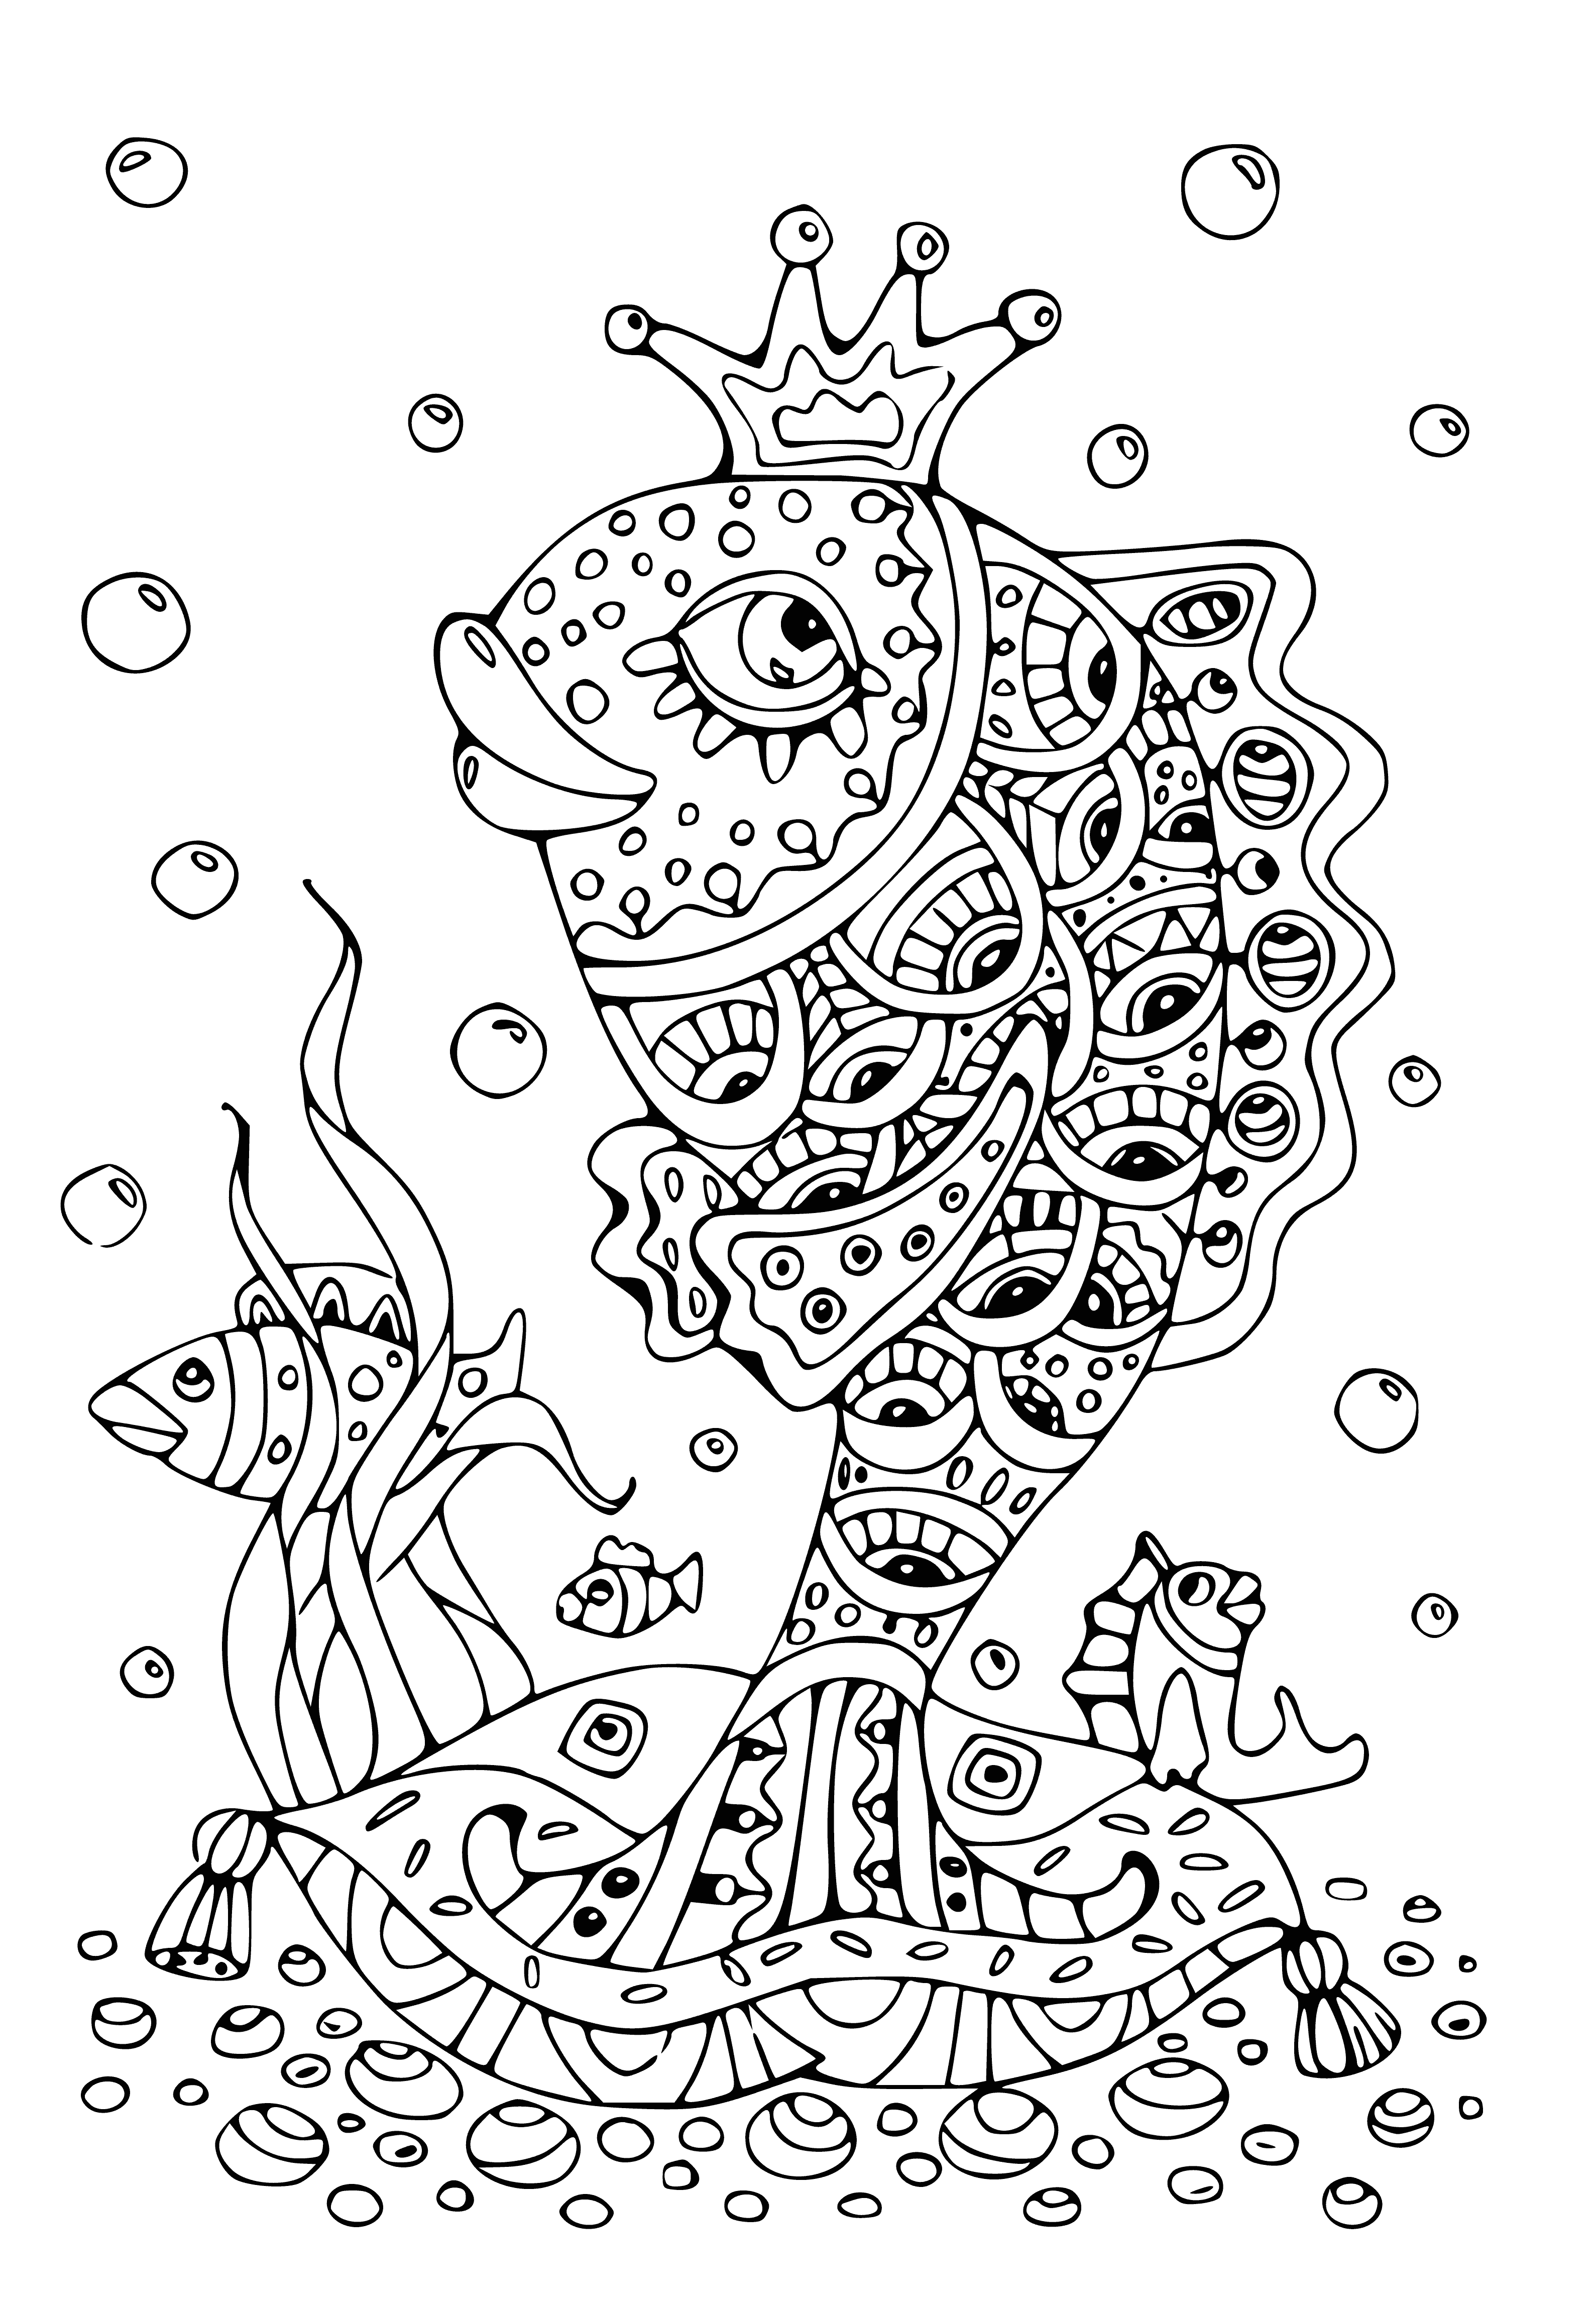 gold fish coloring page